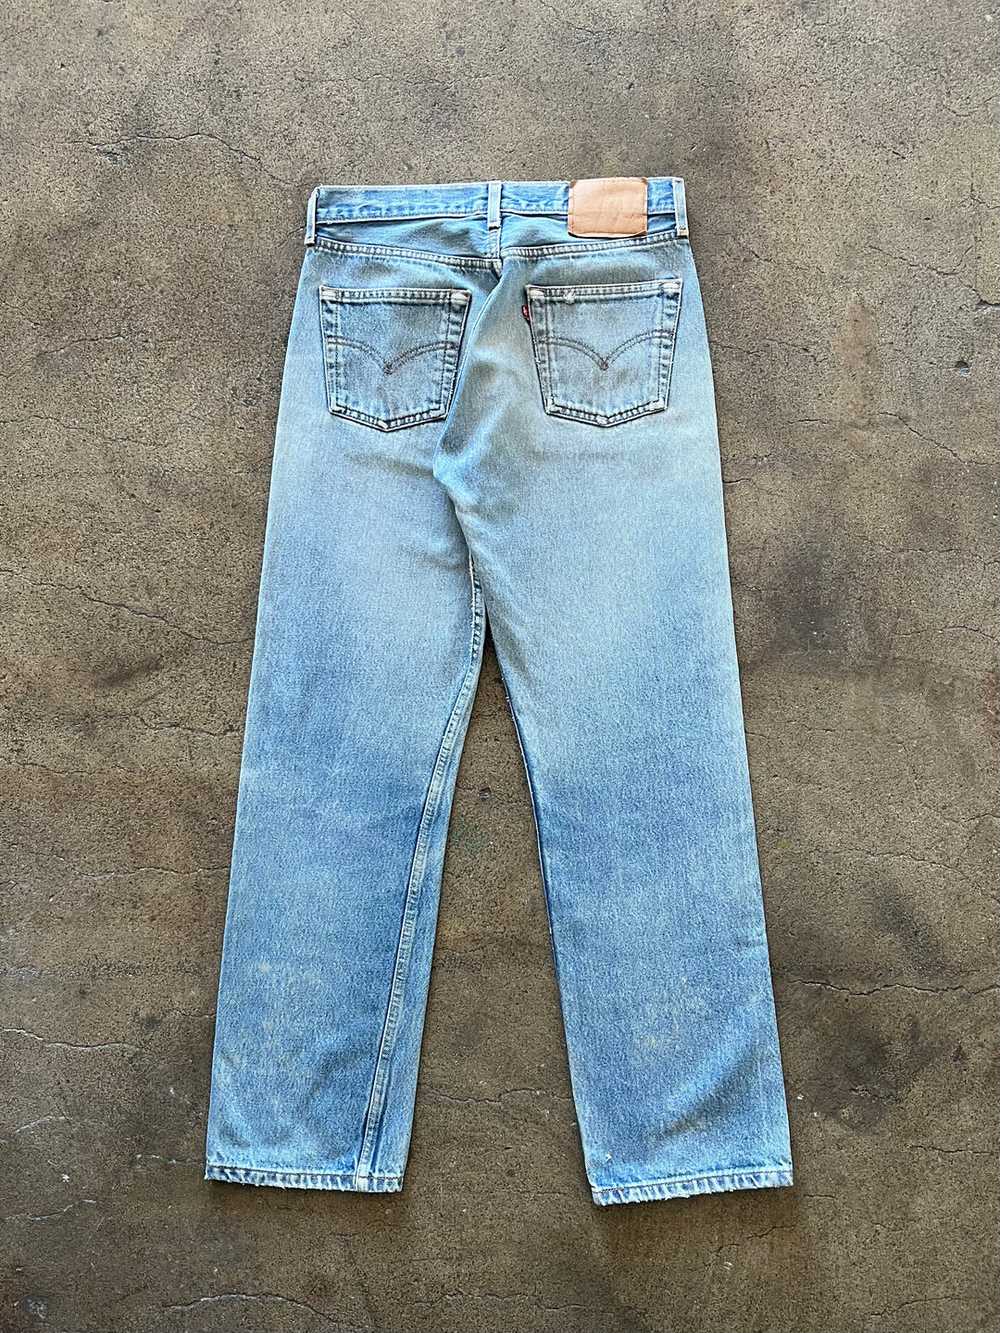 2000s Levi's 501 Jeans Faded 29" x 29" - image 4